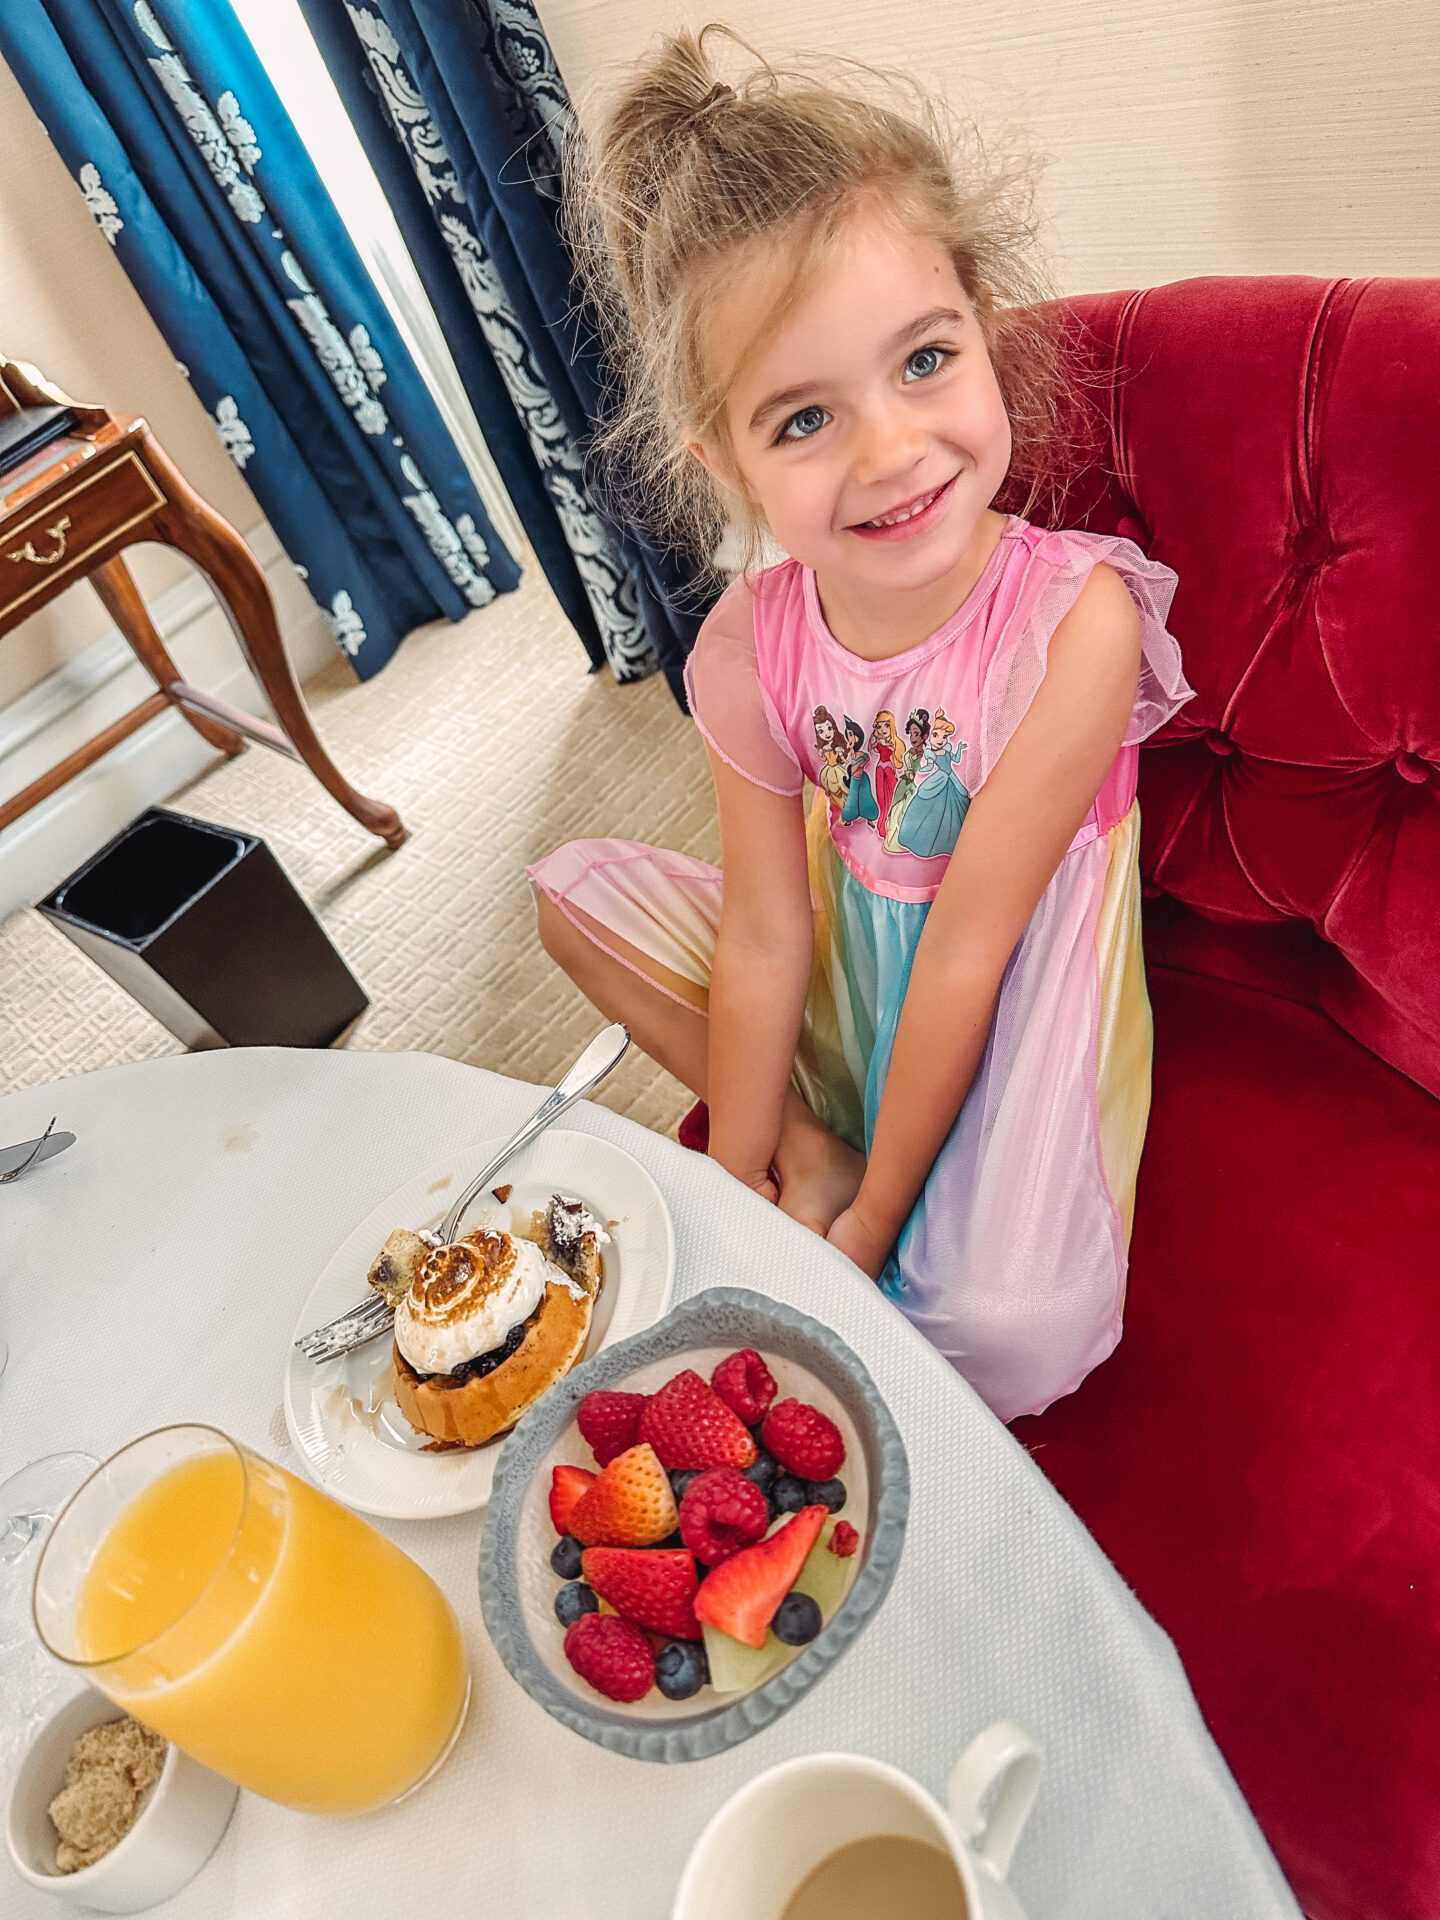 breakfast room service at Waldorf Astoria Hotel in Washington DC by travel and lifestyle blogger Angela Lanter